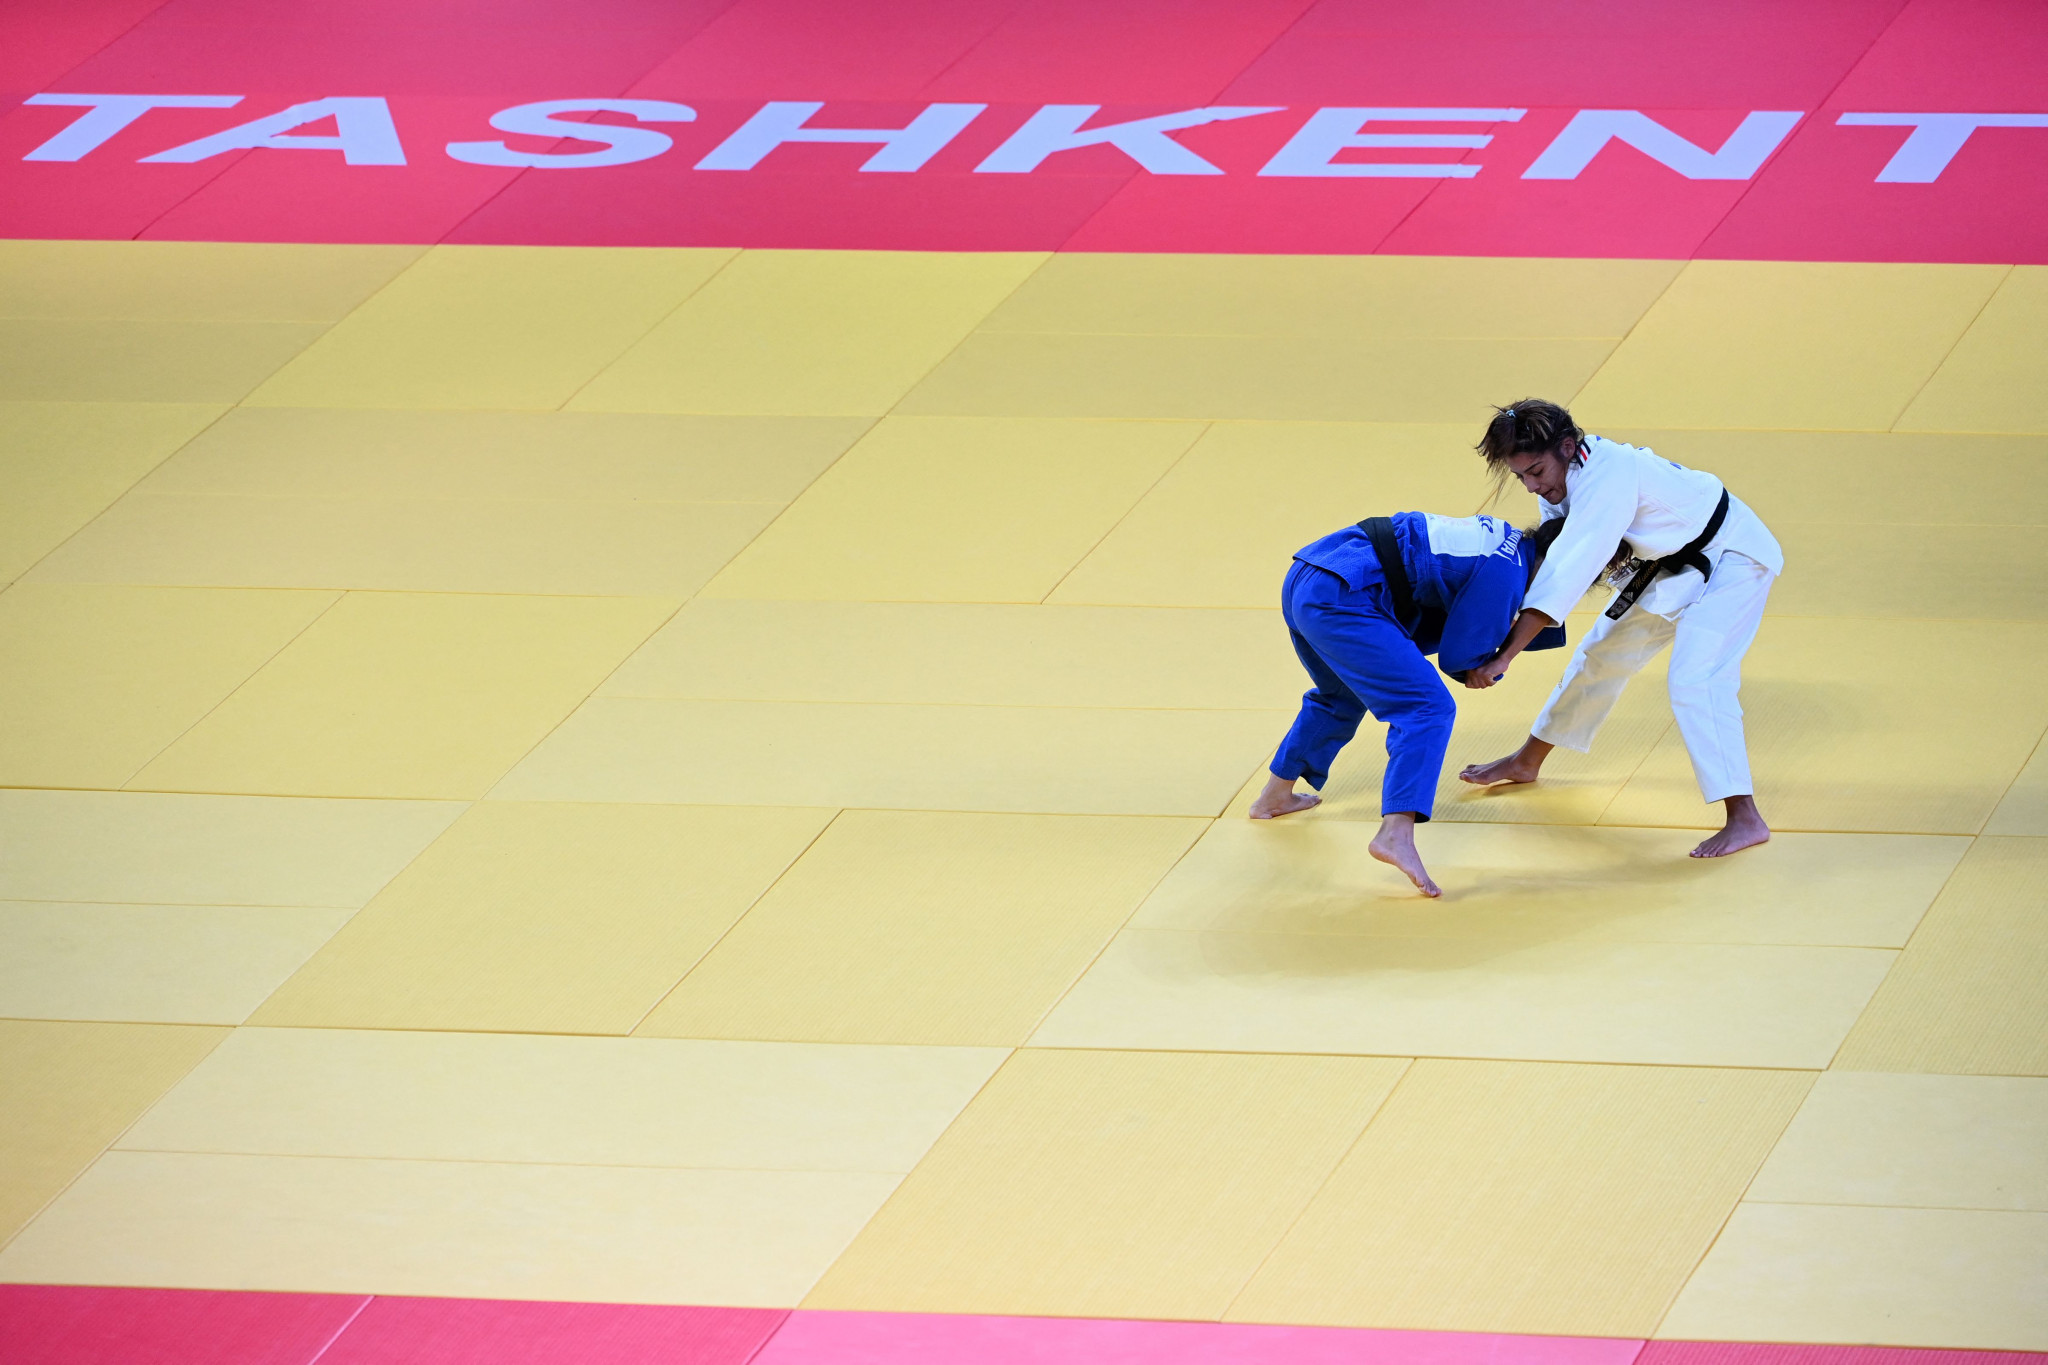 The Judo World Championships began today in Tashkent in front of a raucous crowd at the Humo Arena ©Getty Images